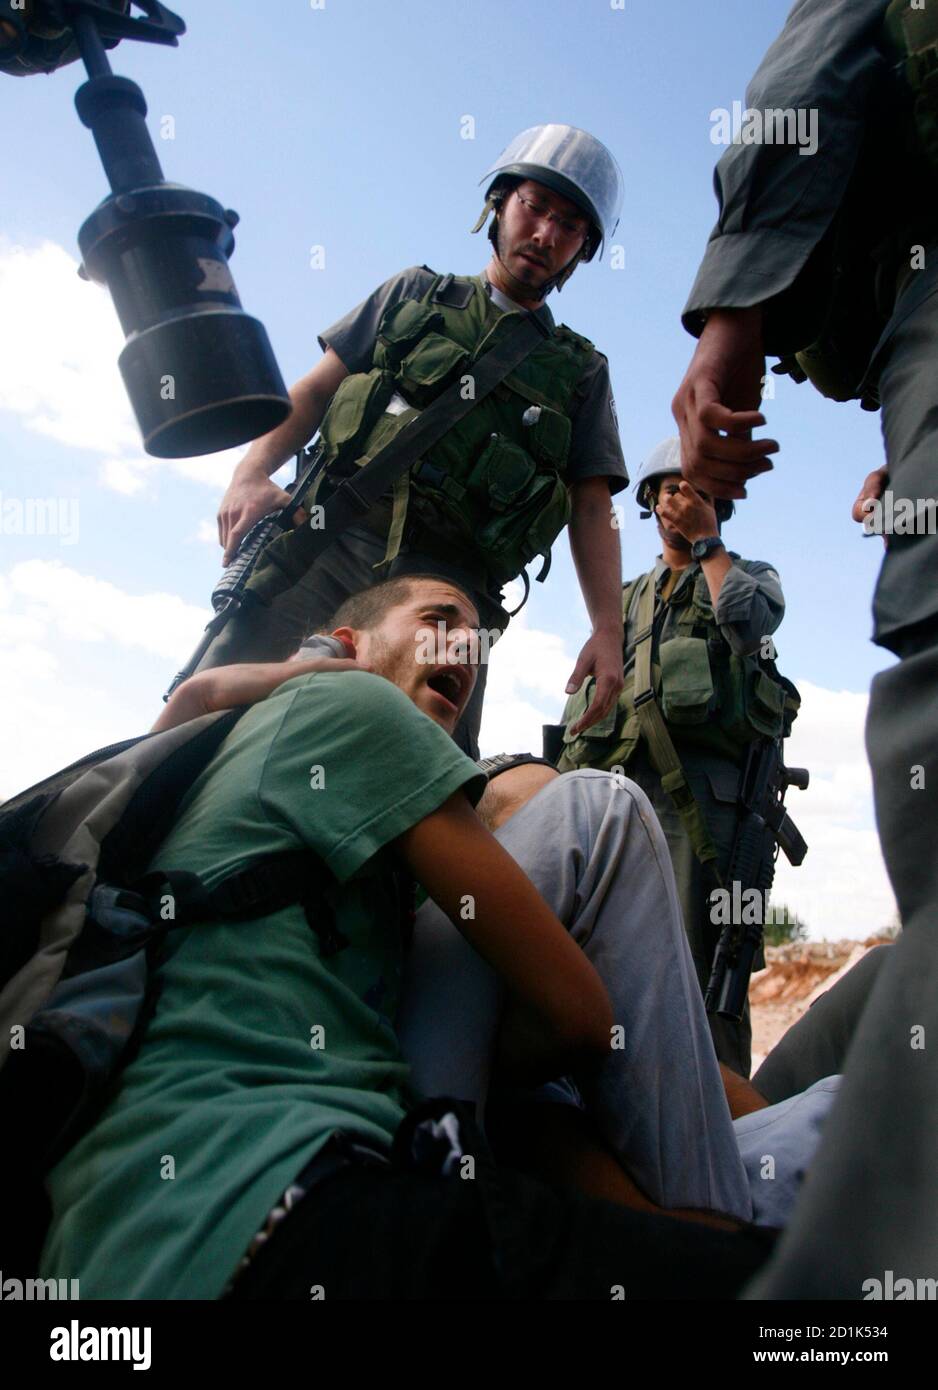 Israeli border police officers detain an Israeli activist of the Rabbis for Human Rights movement (RHR) after activists joined Palestinians for the olive harvest near the construction site of the controversial Israeli barrier in the West Bank village of Nilin, near Ramallah October 10, 2008.     REUTERS/Fadi Arouri (WEST BANK) Stock Photo